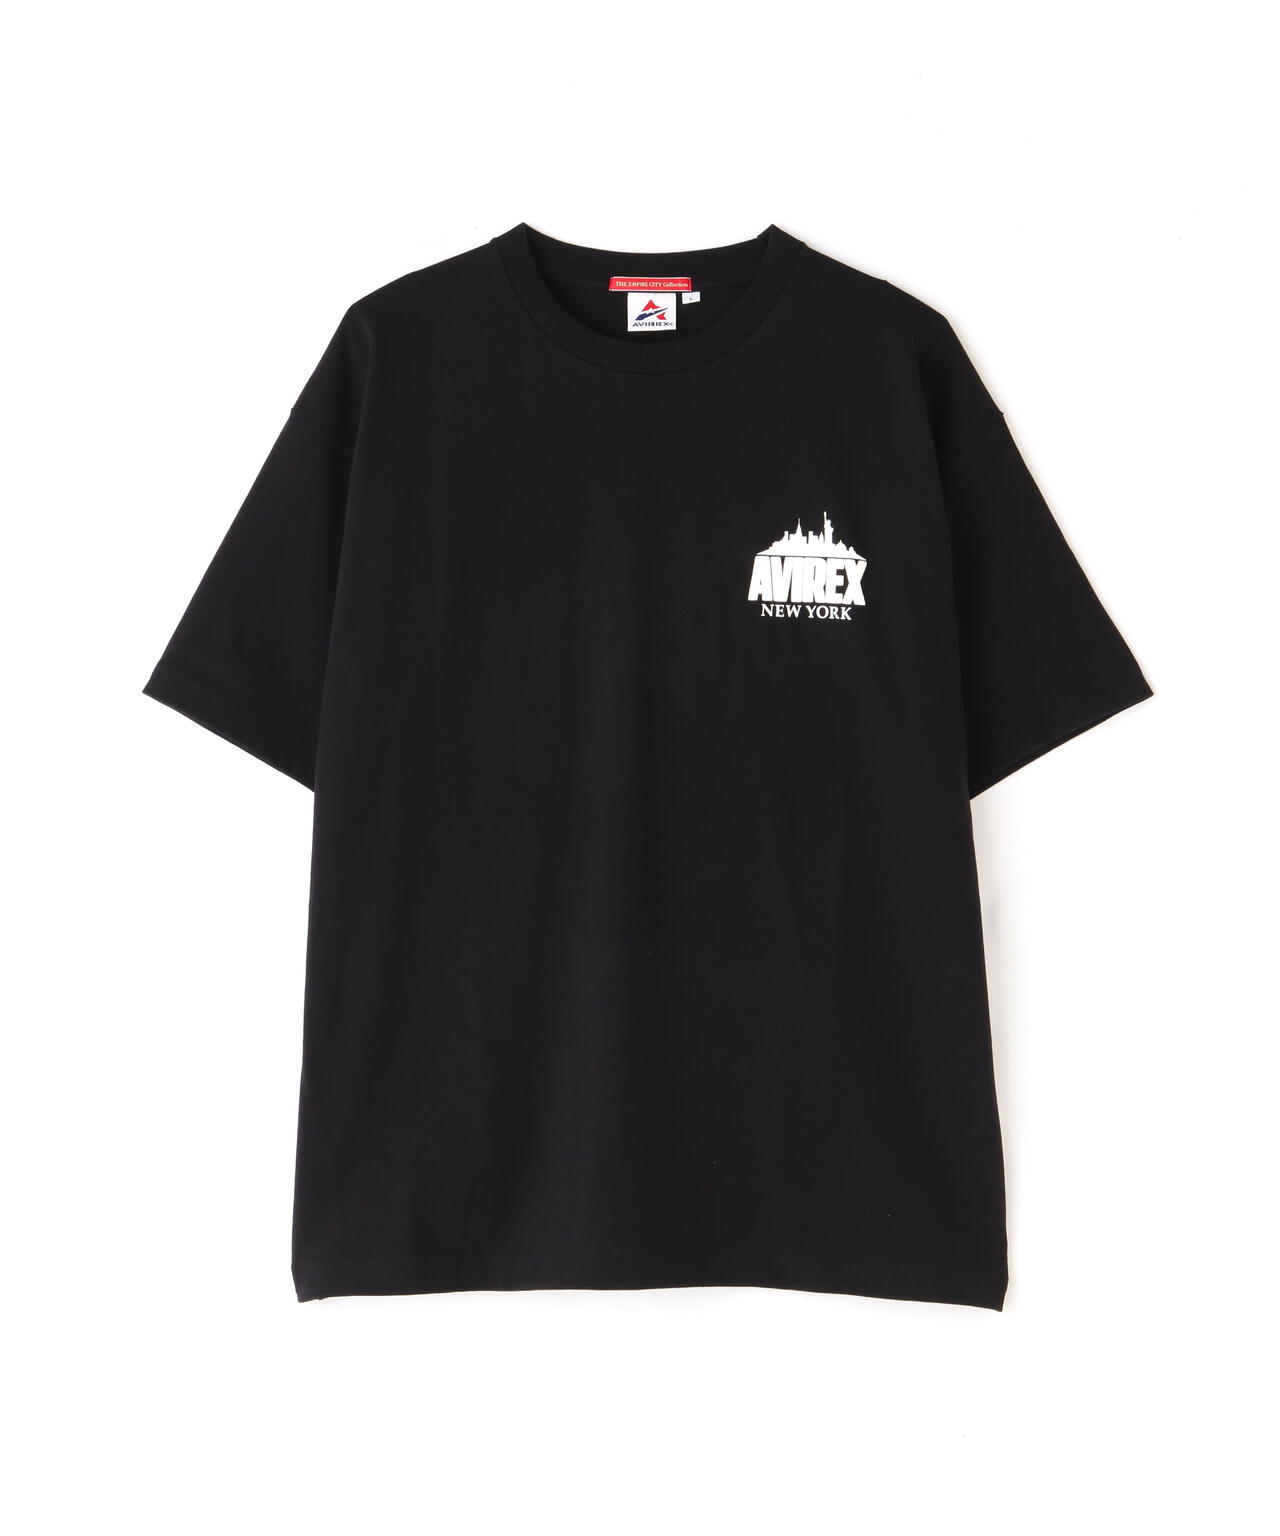 COLLECTION》NEWYORK CITY SCAPE SHORT SLEEVE T-SHIRT/ニューヨーク 